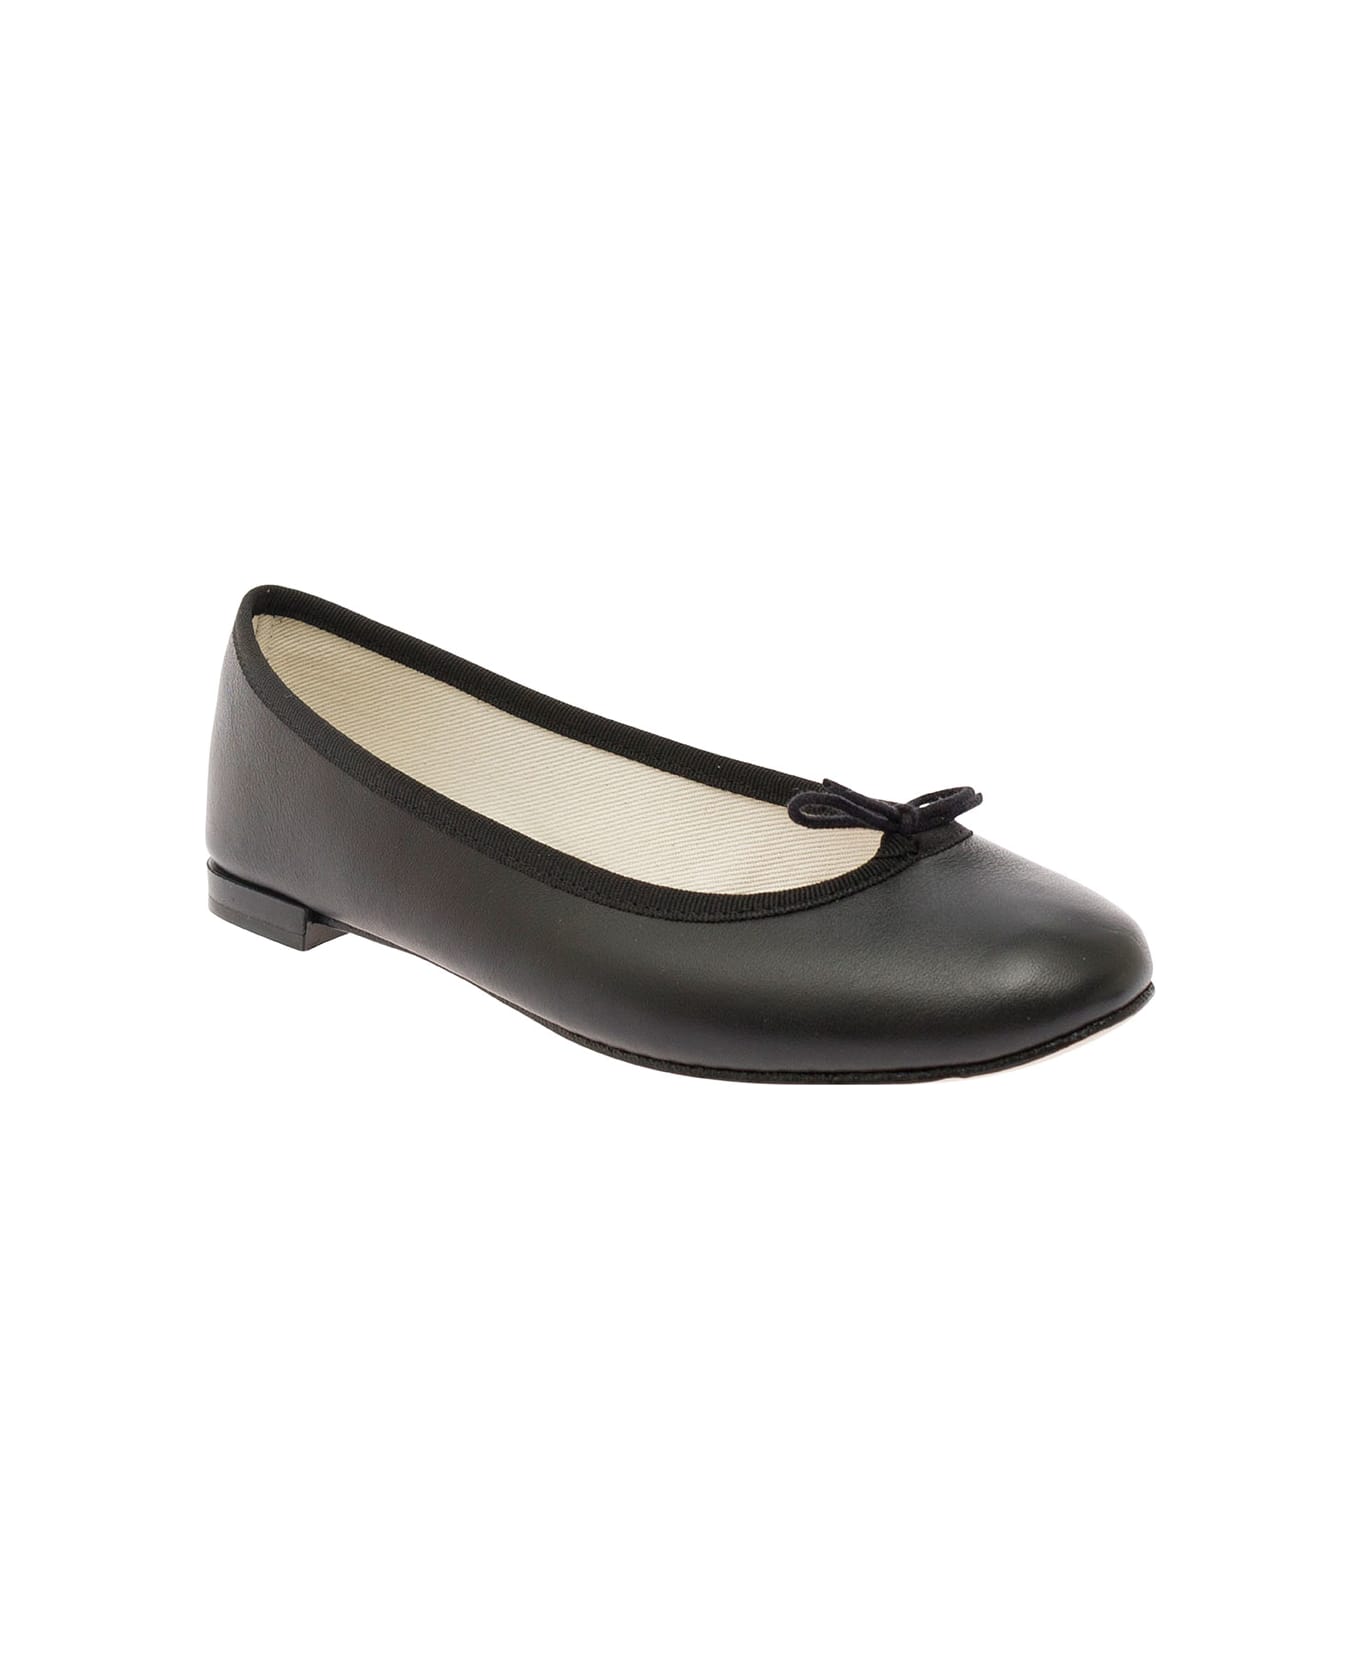 Repetto 'cendrillon' Black Ballet Flats With Bow Detail In Smooth Leather Woman - Black